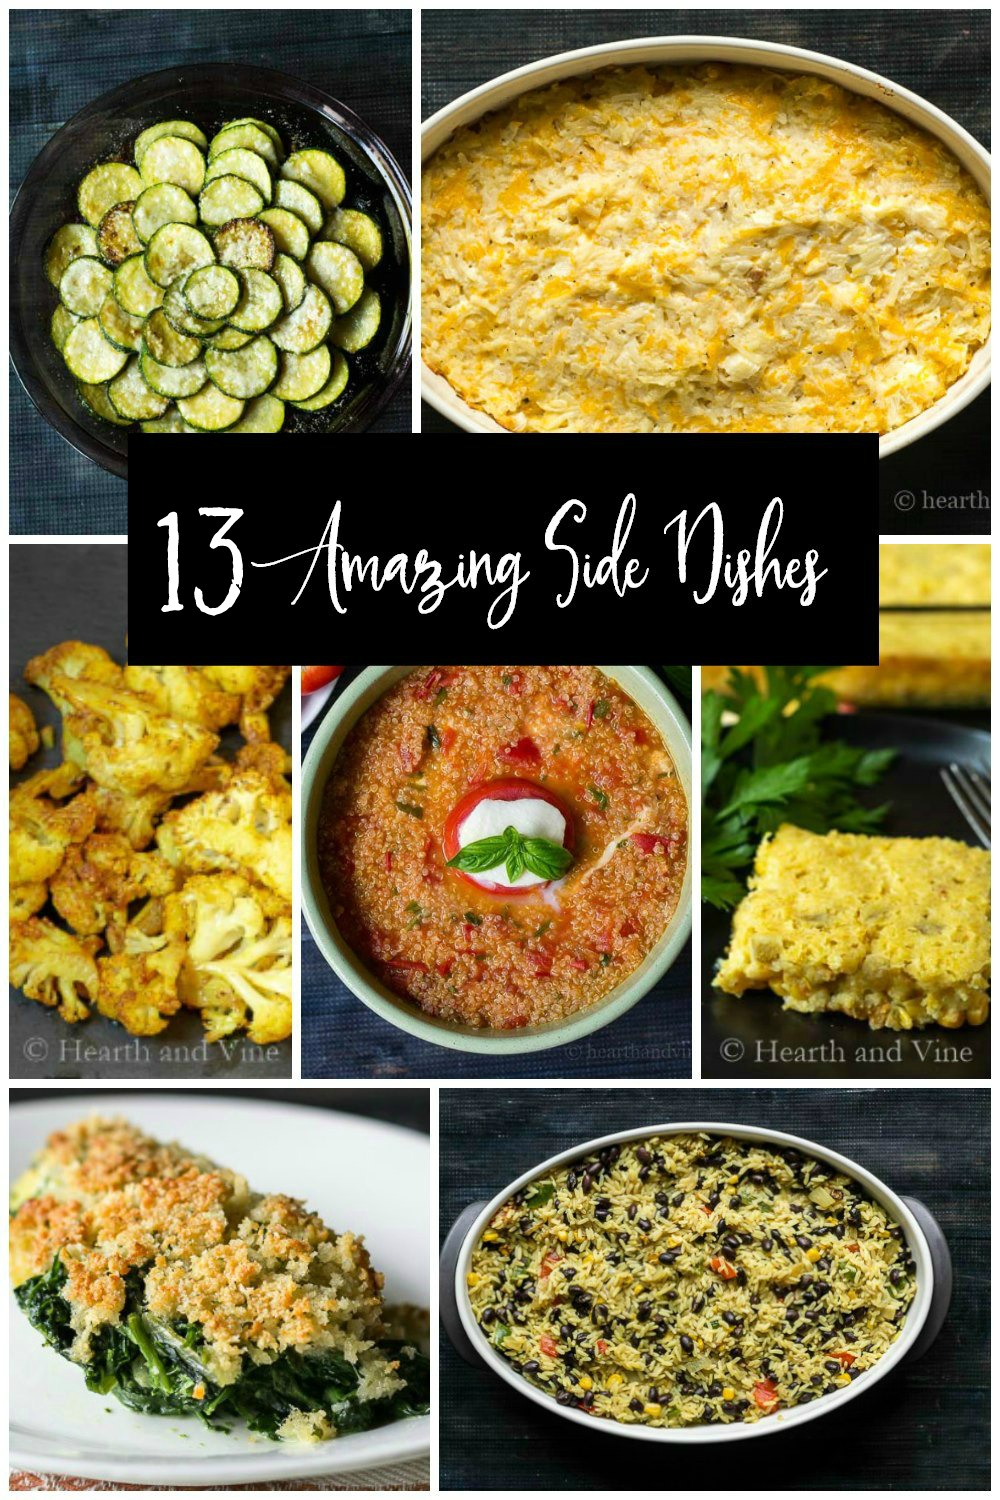 Collage of side dish recipes